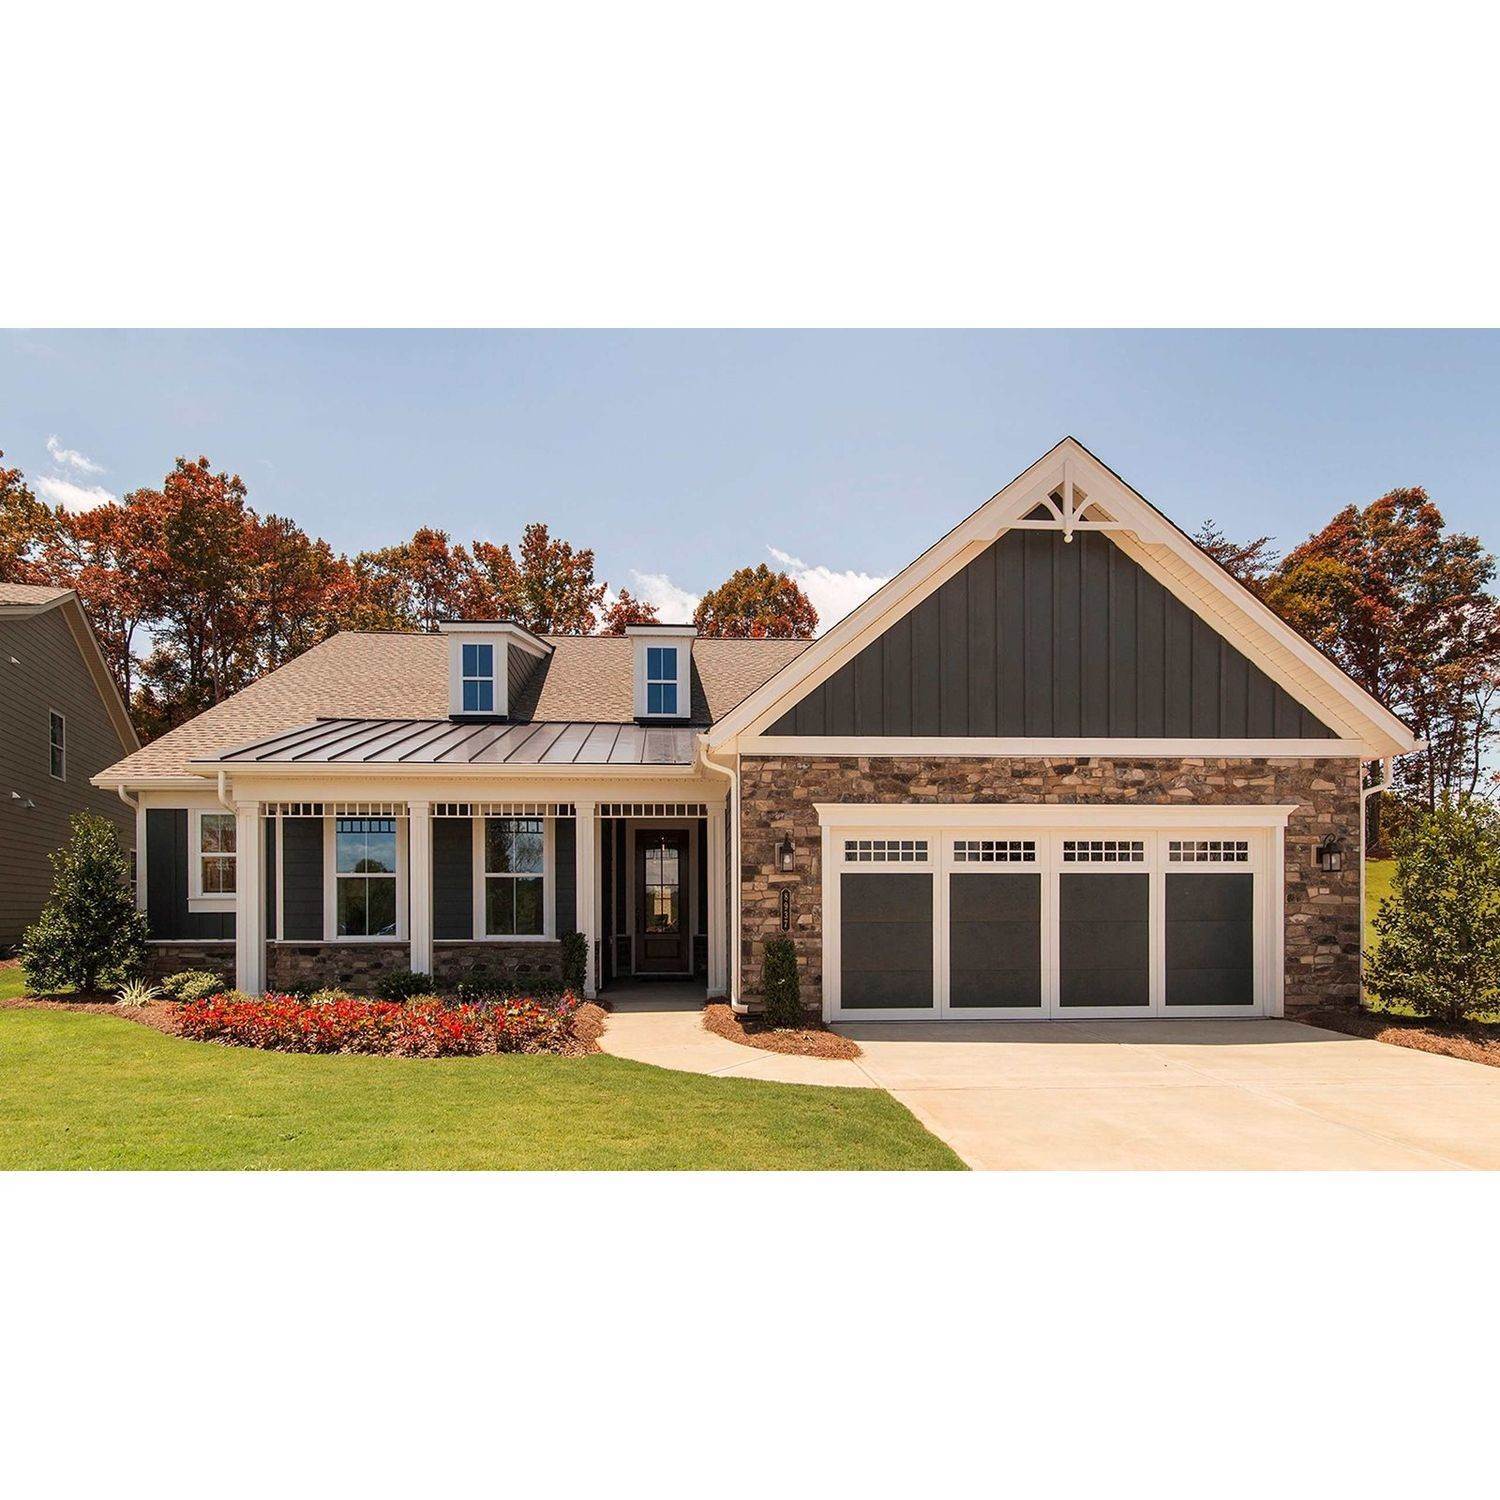 4. Cresswind Charlotte building at 8913 Silver Springs Court, Charlotte, NC 28215